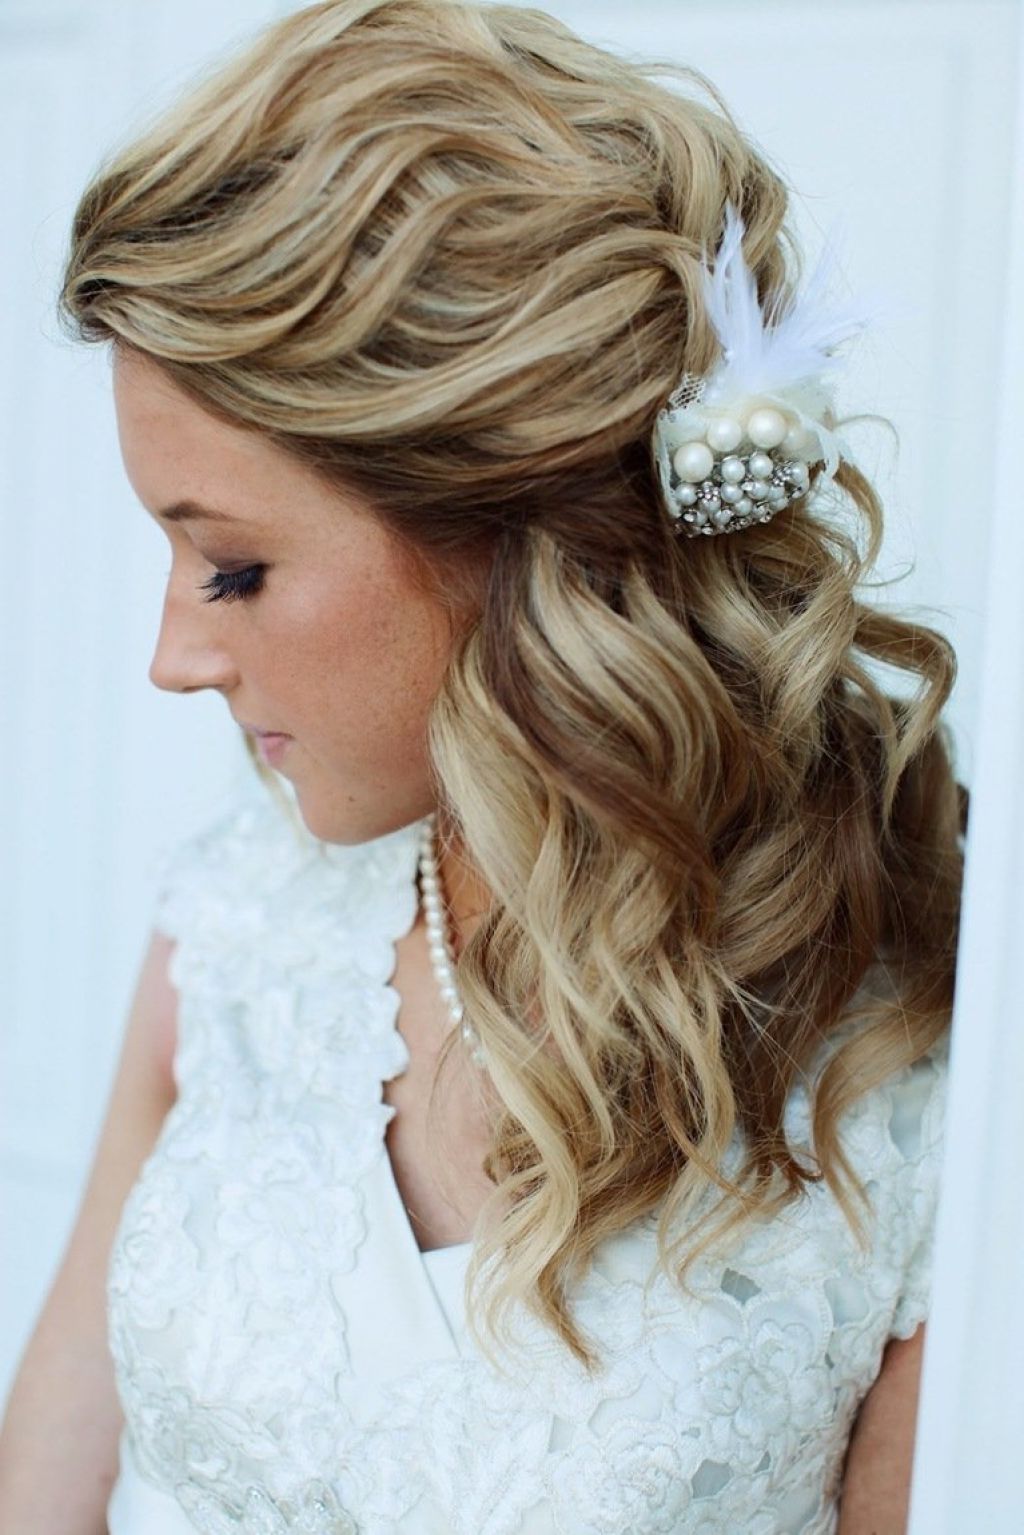 Famous Shoulder Length Wedding Hairstyles With √ 24+ Awesome Wedding Hairstyles For Shoulder Length Hair: Cute (View 1 of 15)